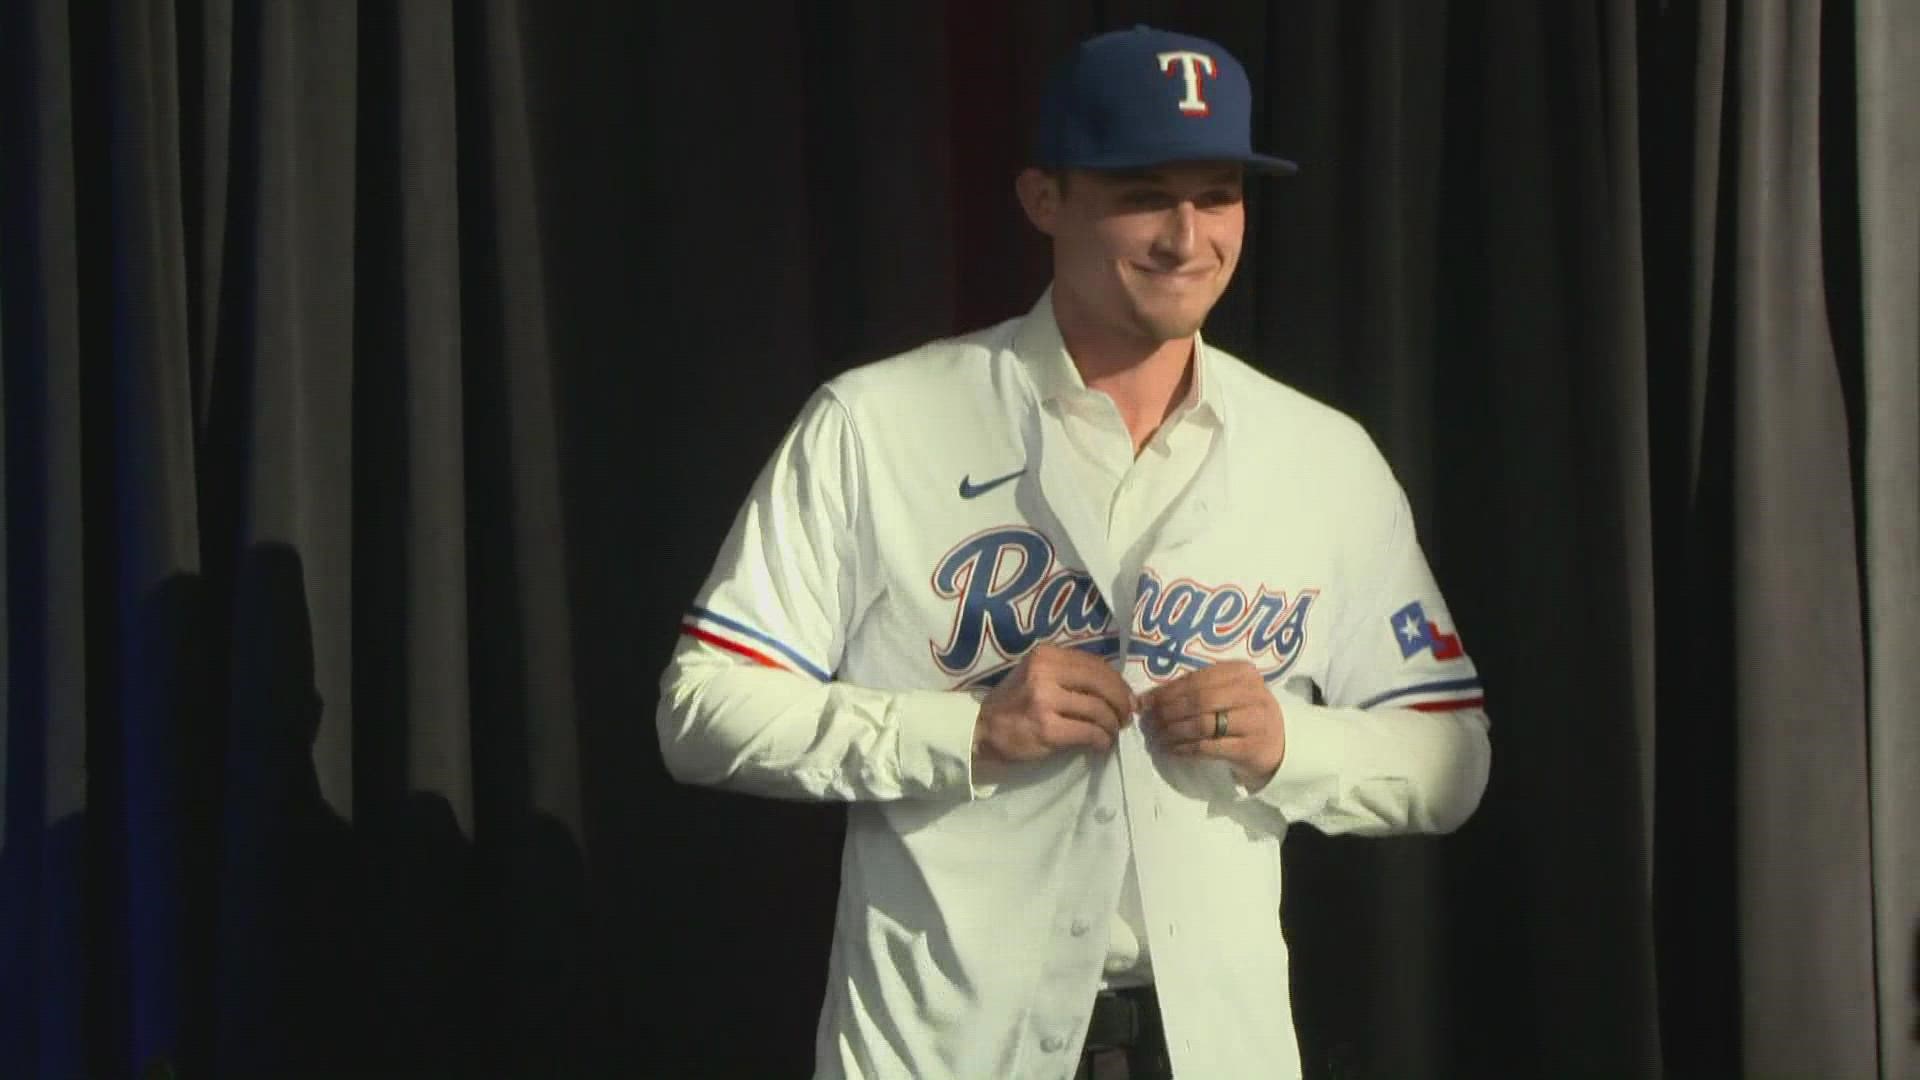 The Texas Rangers introduce their new shortstop, Corey Seager.